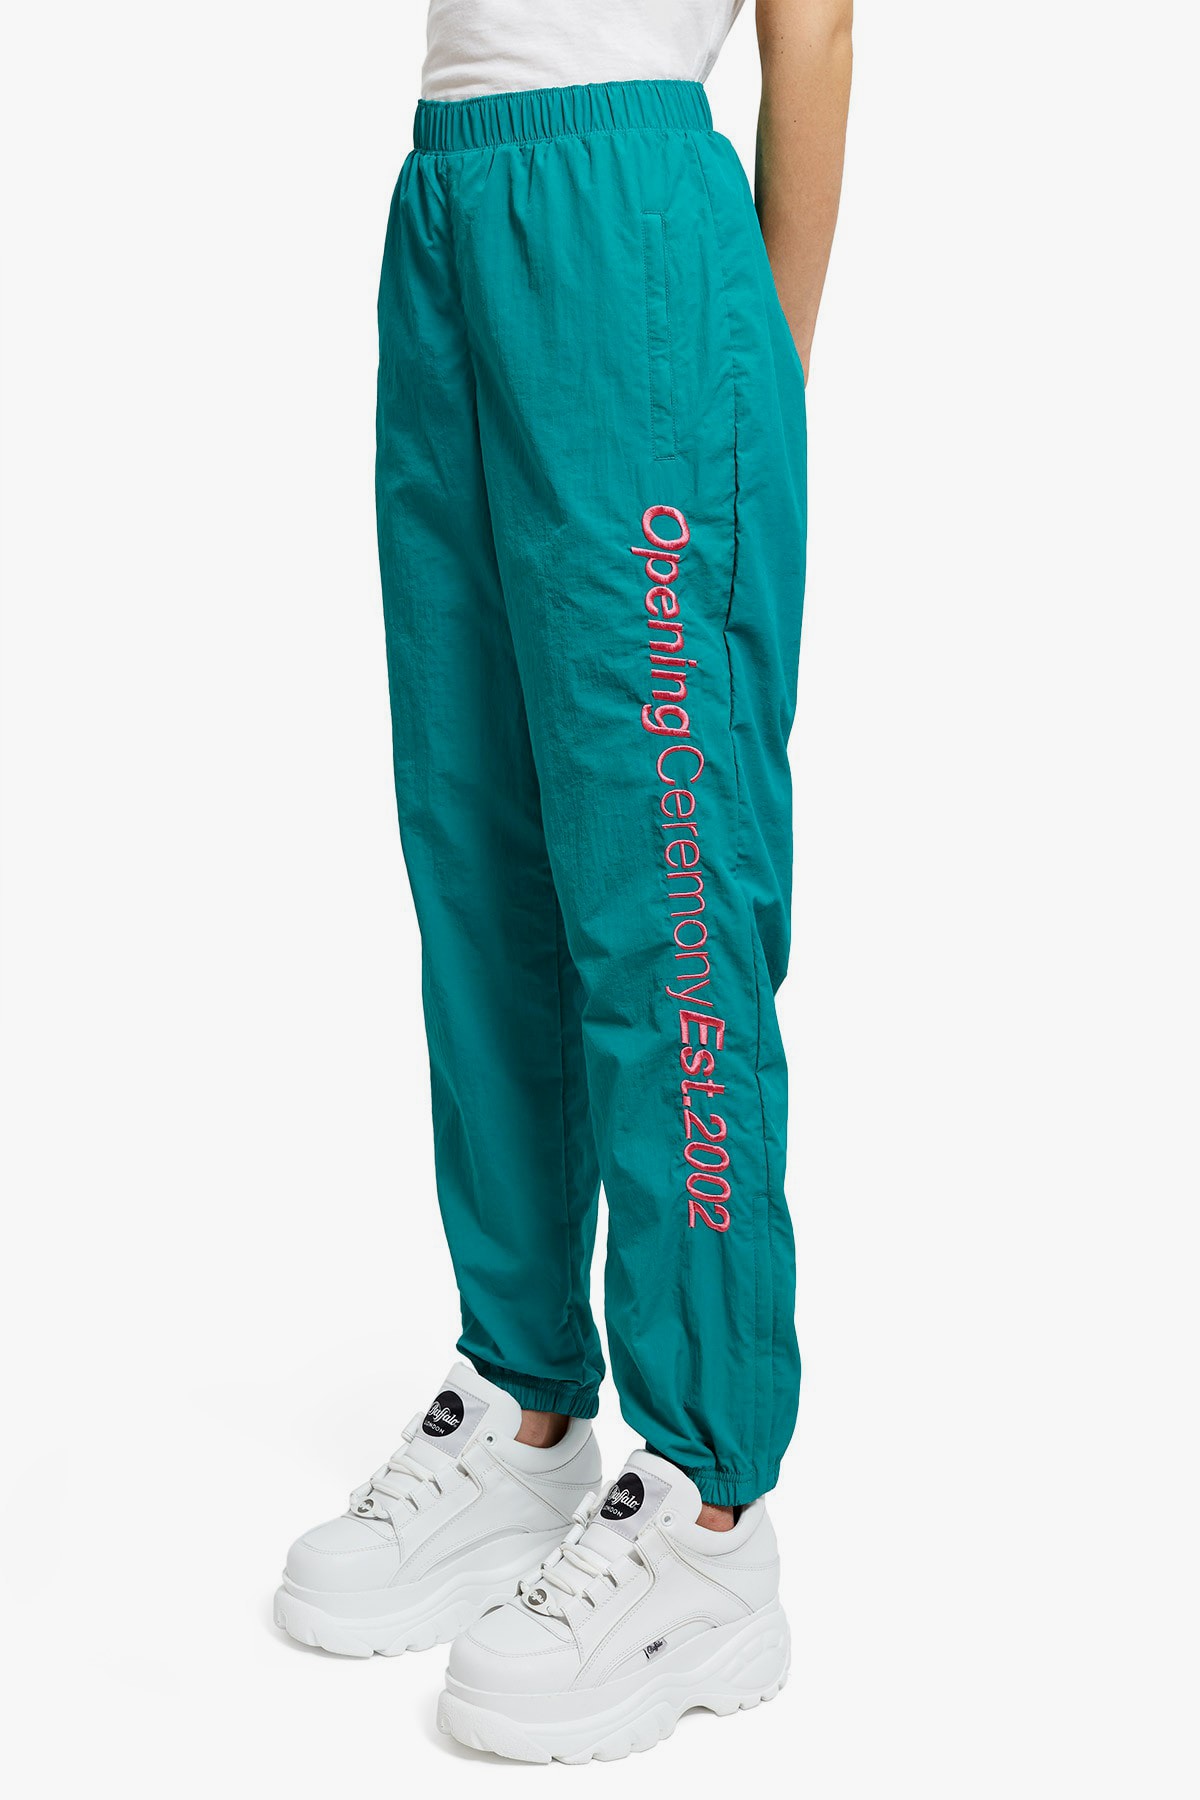 Opening Ceremony Jog Pant Teal Green